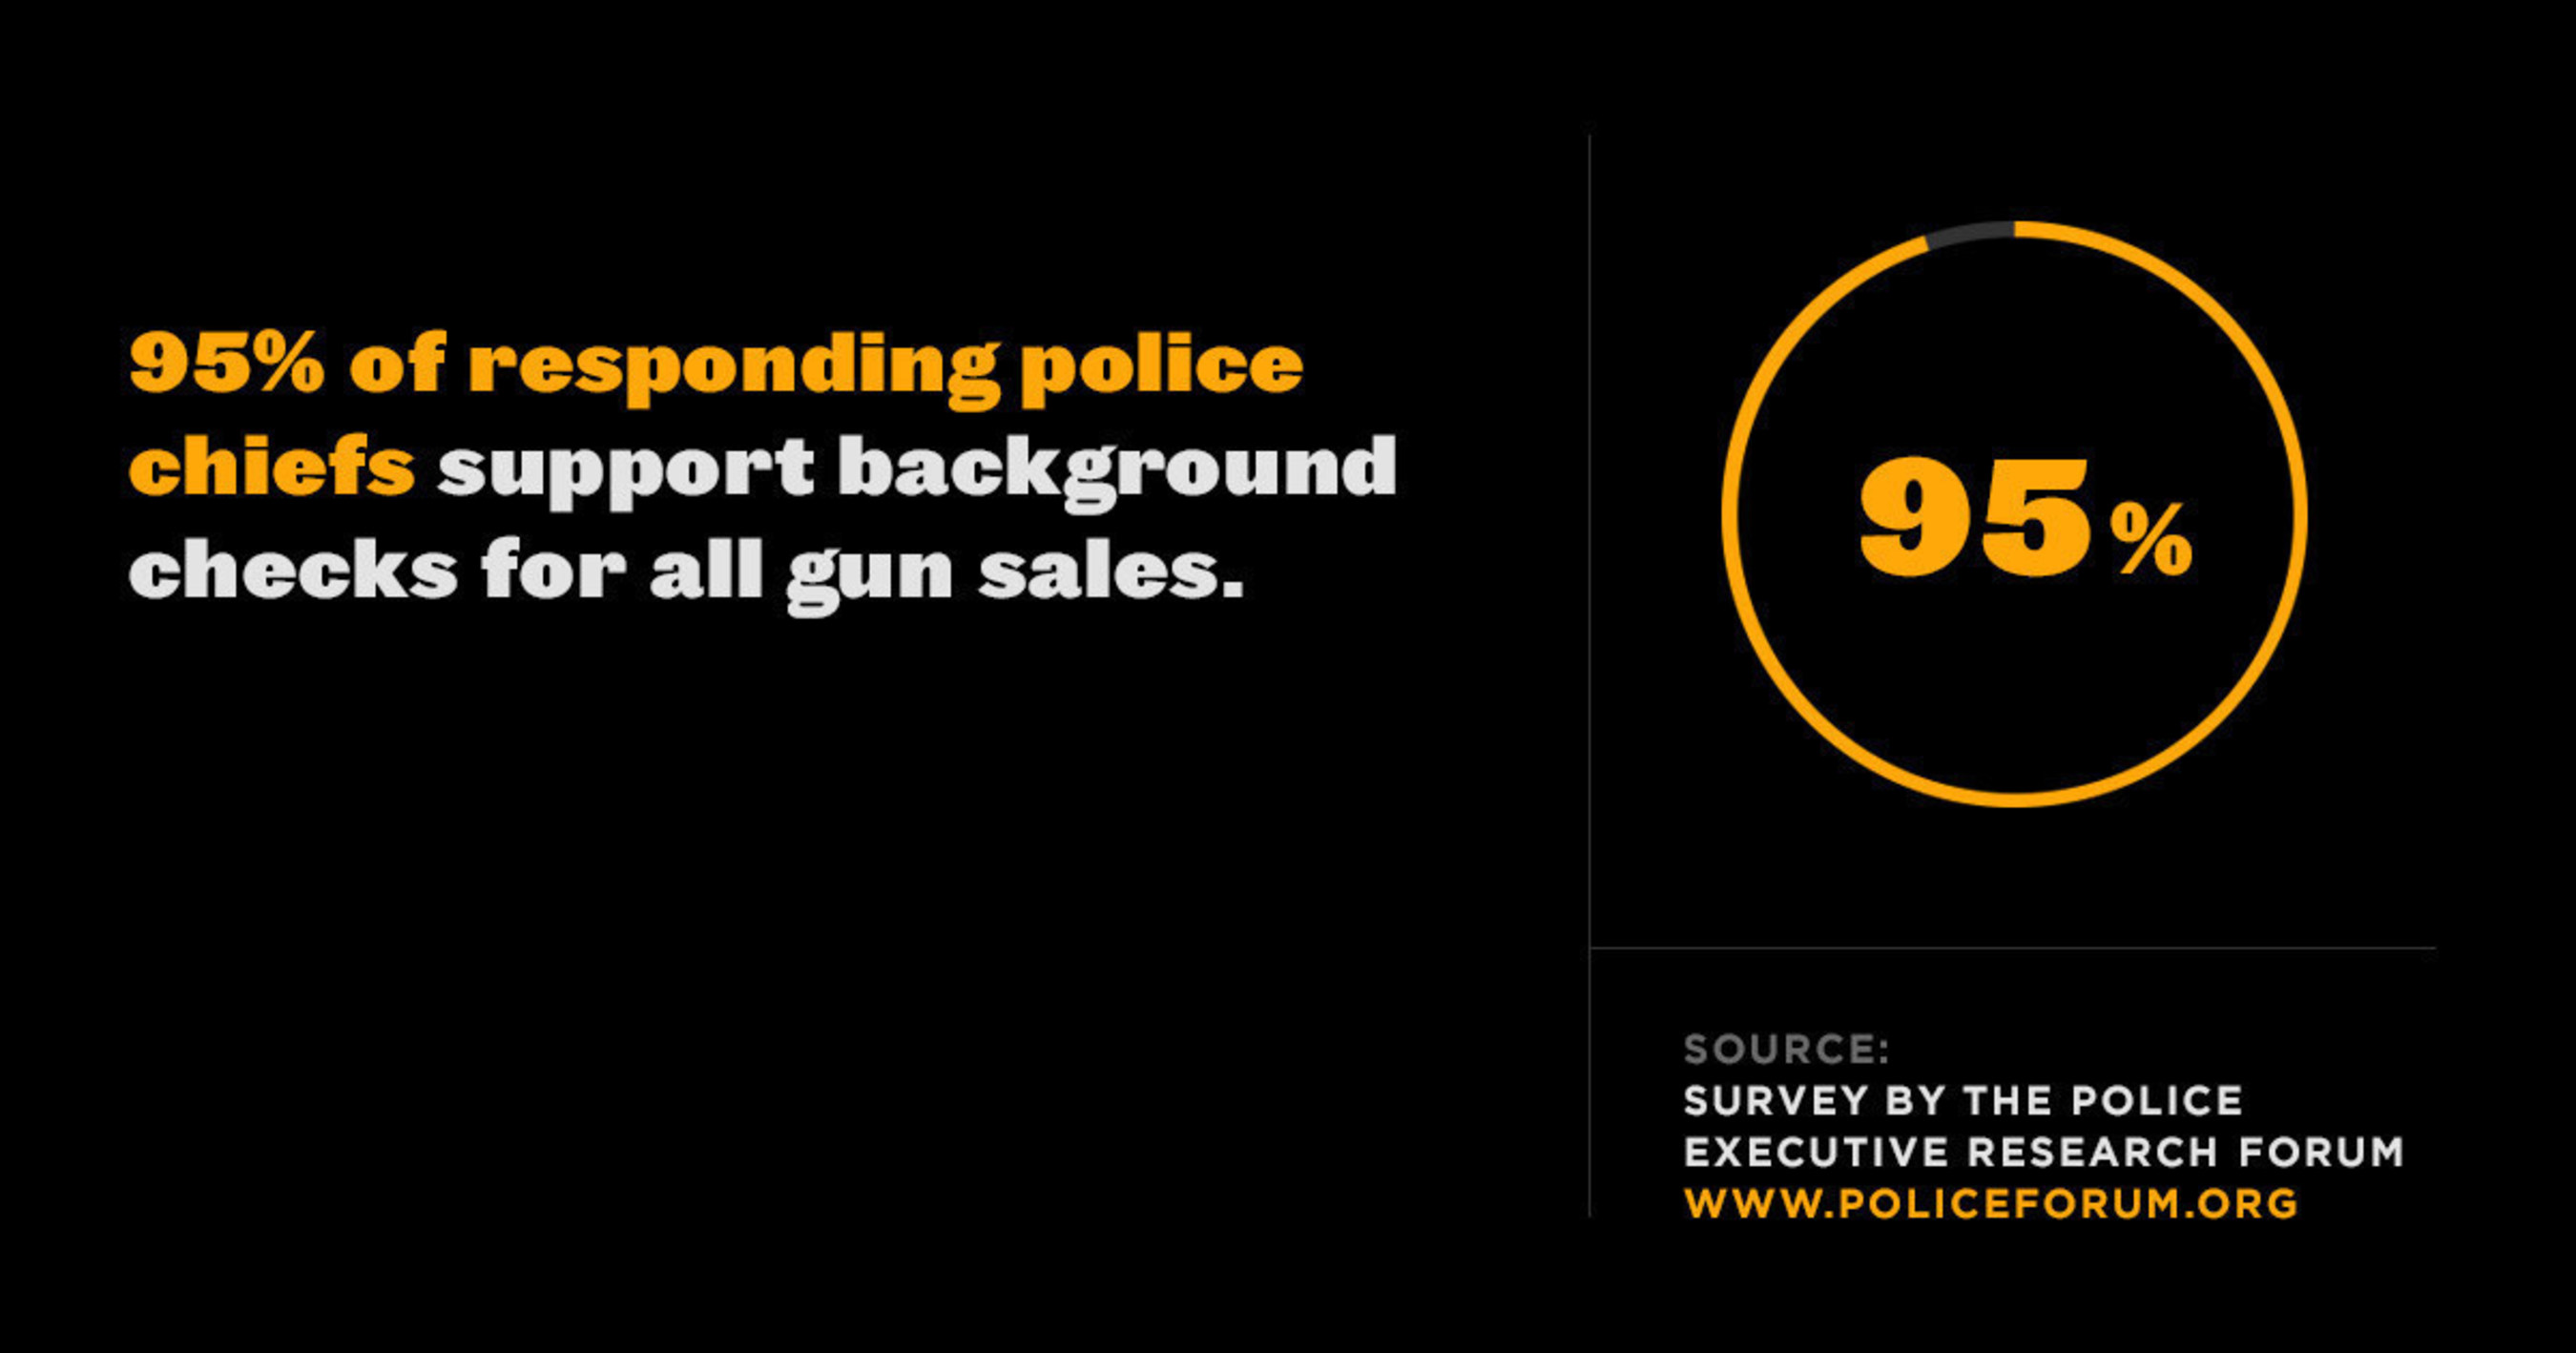 A study by the Police Executive Research Forum found that 95% of responding police chiefs support background checks for all gun sales. Read the full report at The full report can be found at http://www.policeforum.org/assets/gunpolicyreport2015.pdf.